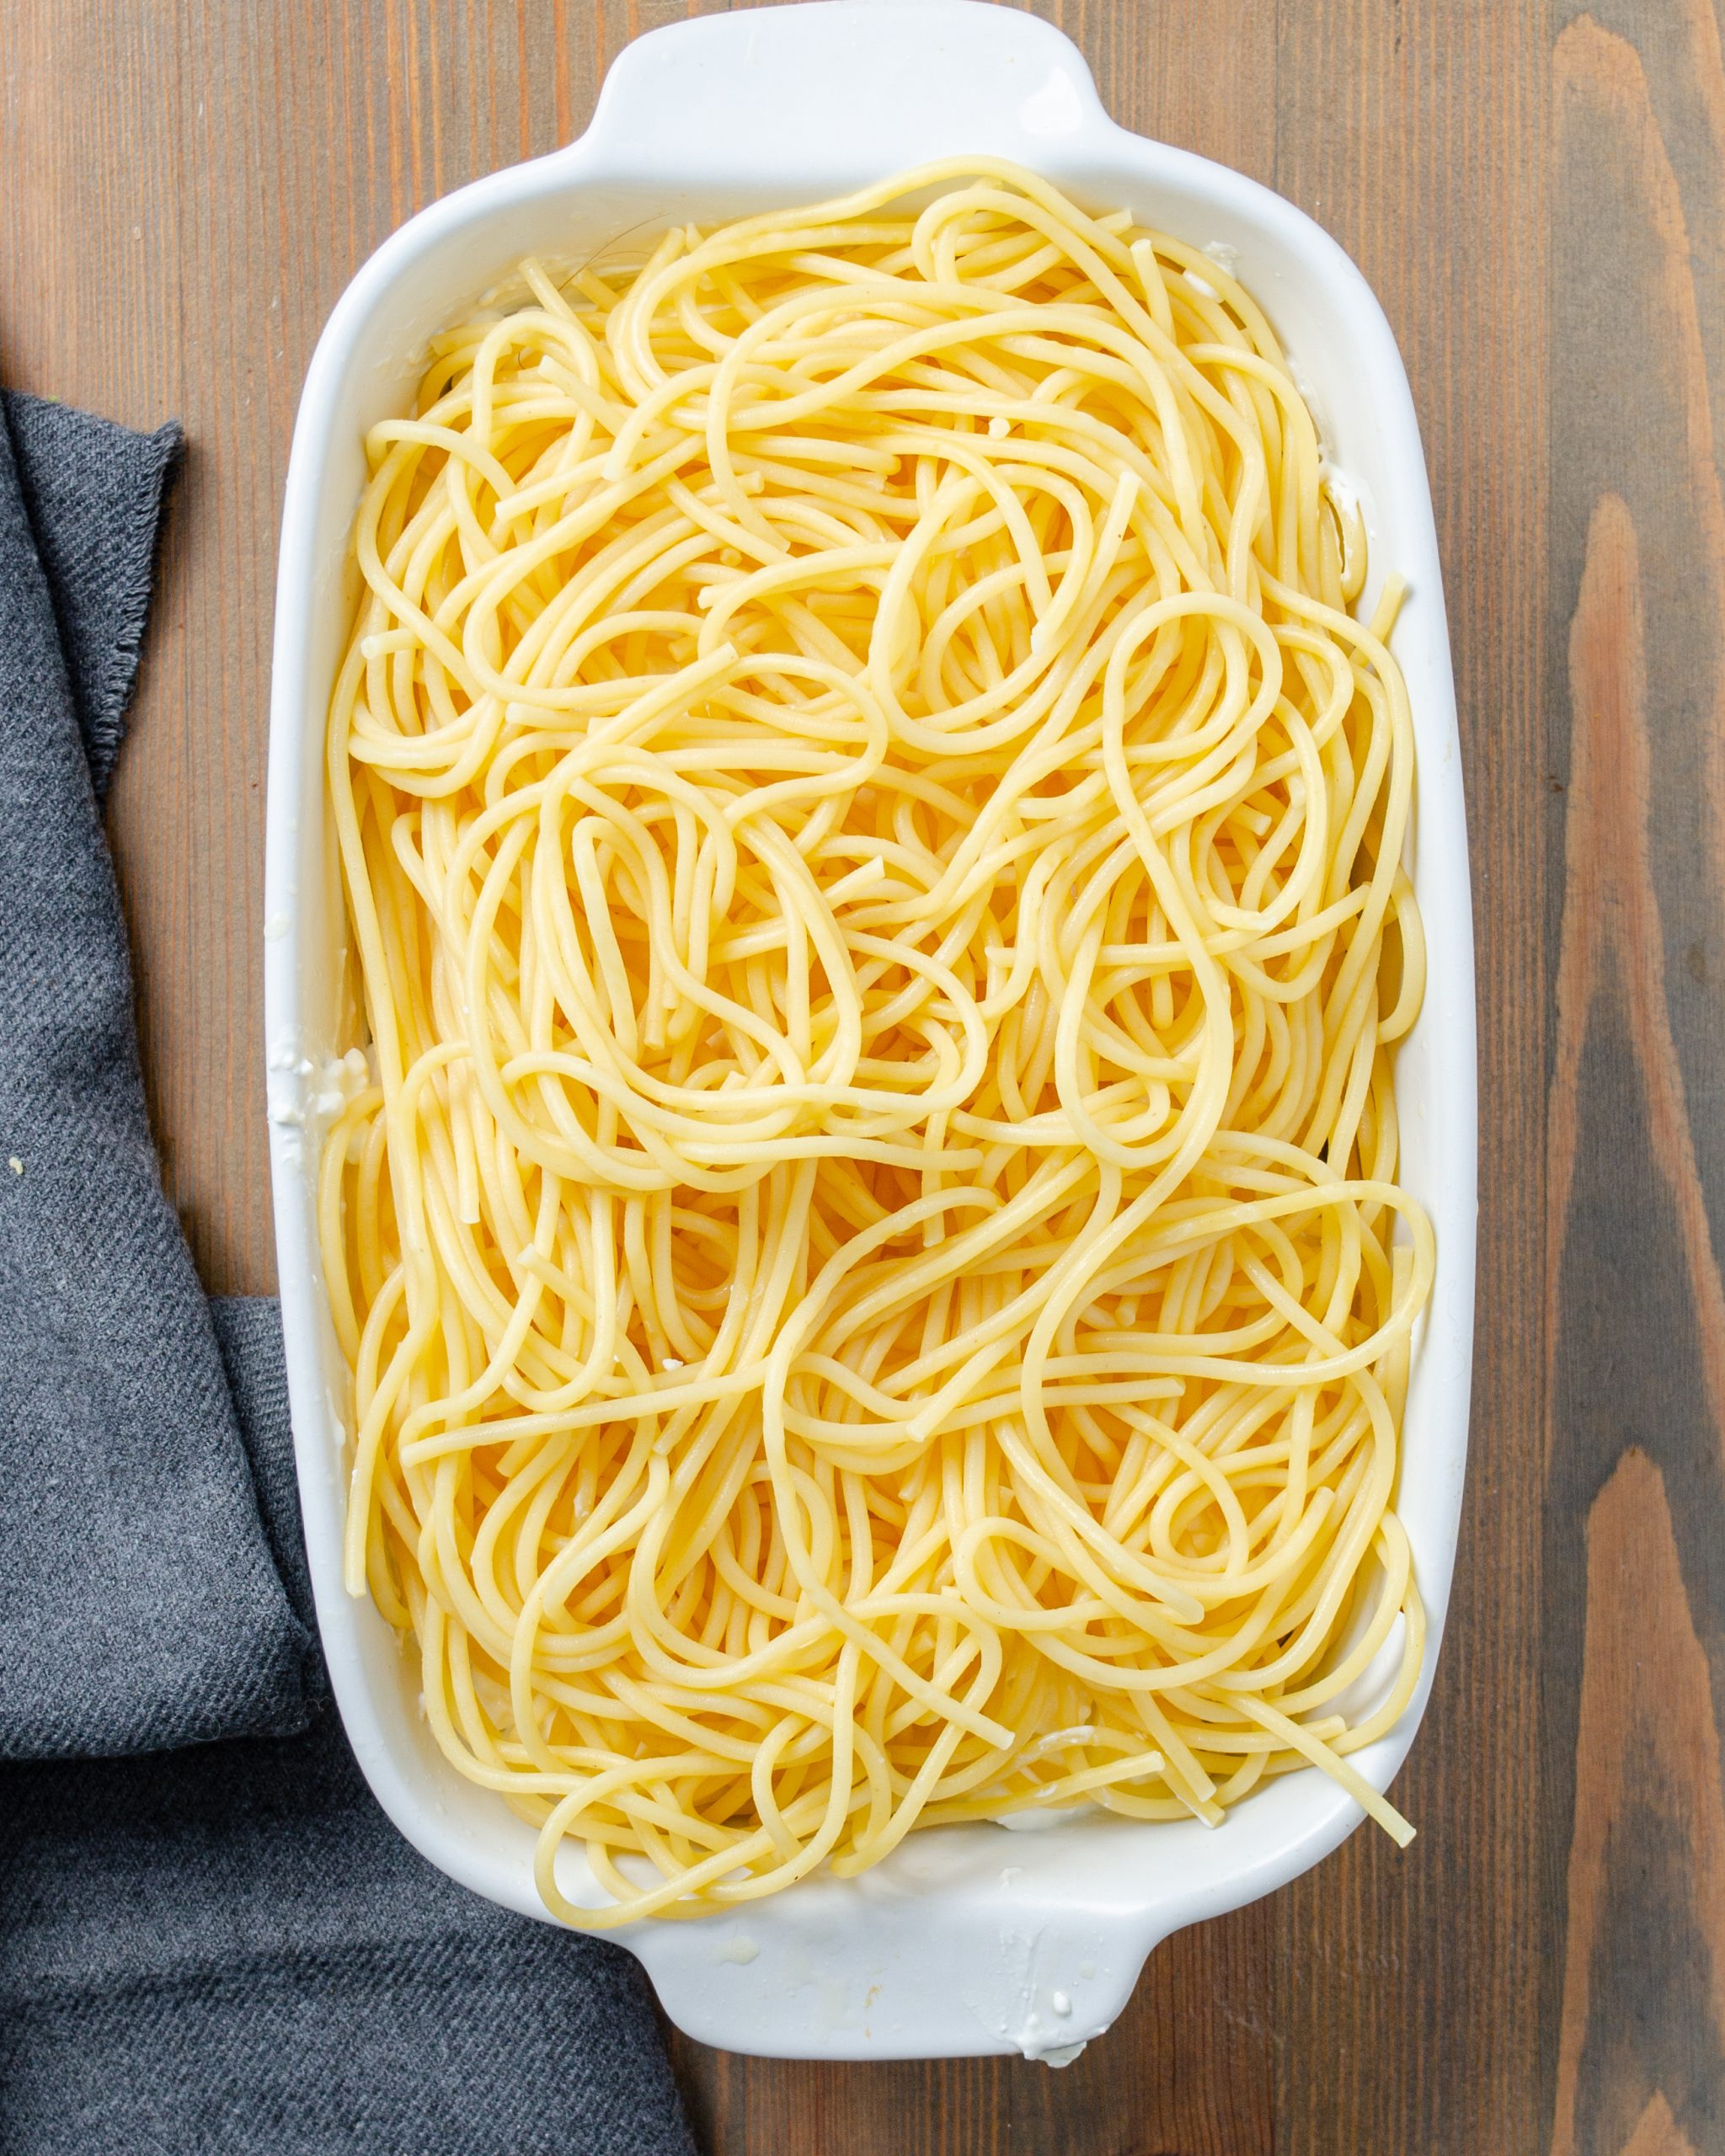 Place the rest of the noodles in a second layer over the cheese mixture.